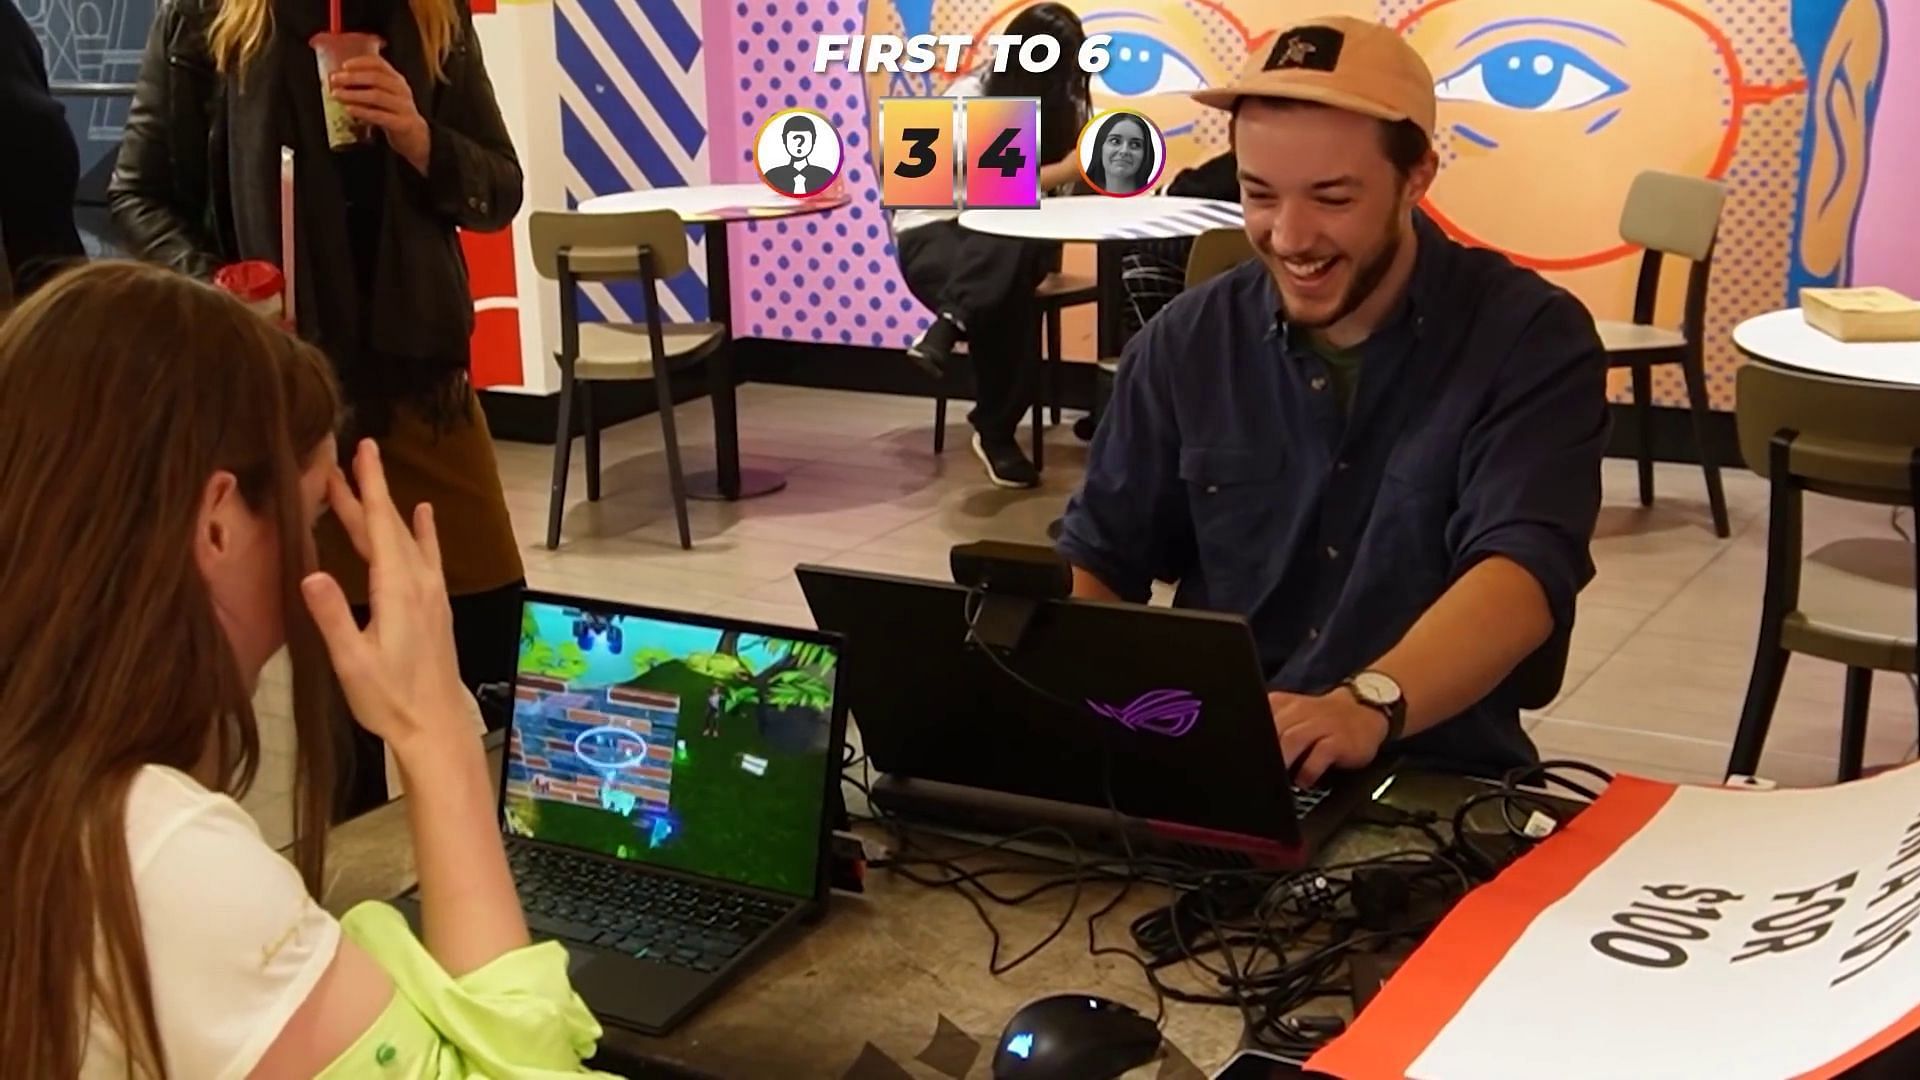 She came across several first-timers who had never played the game before (Image via YouTube/Loserfruit)